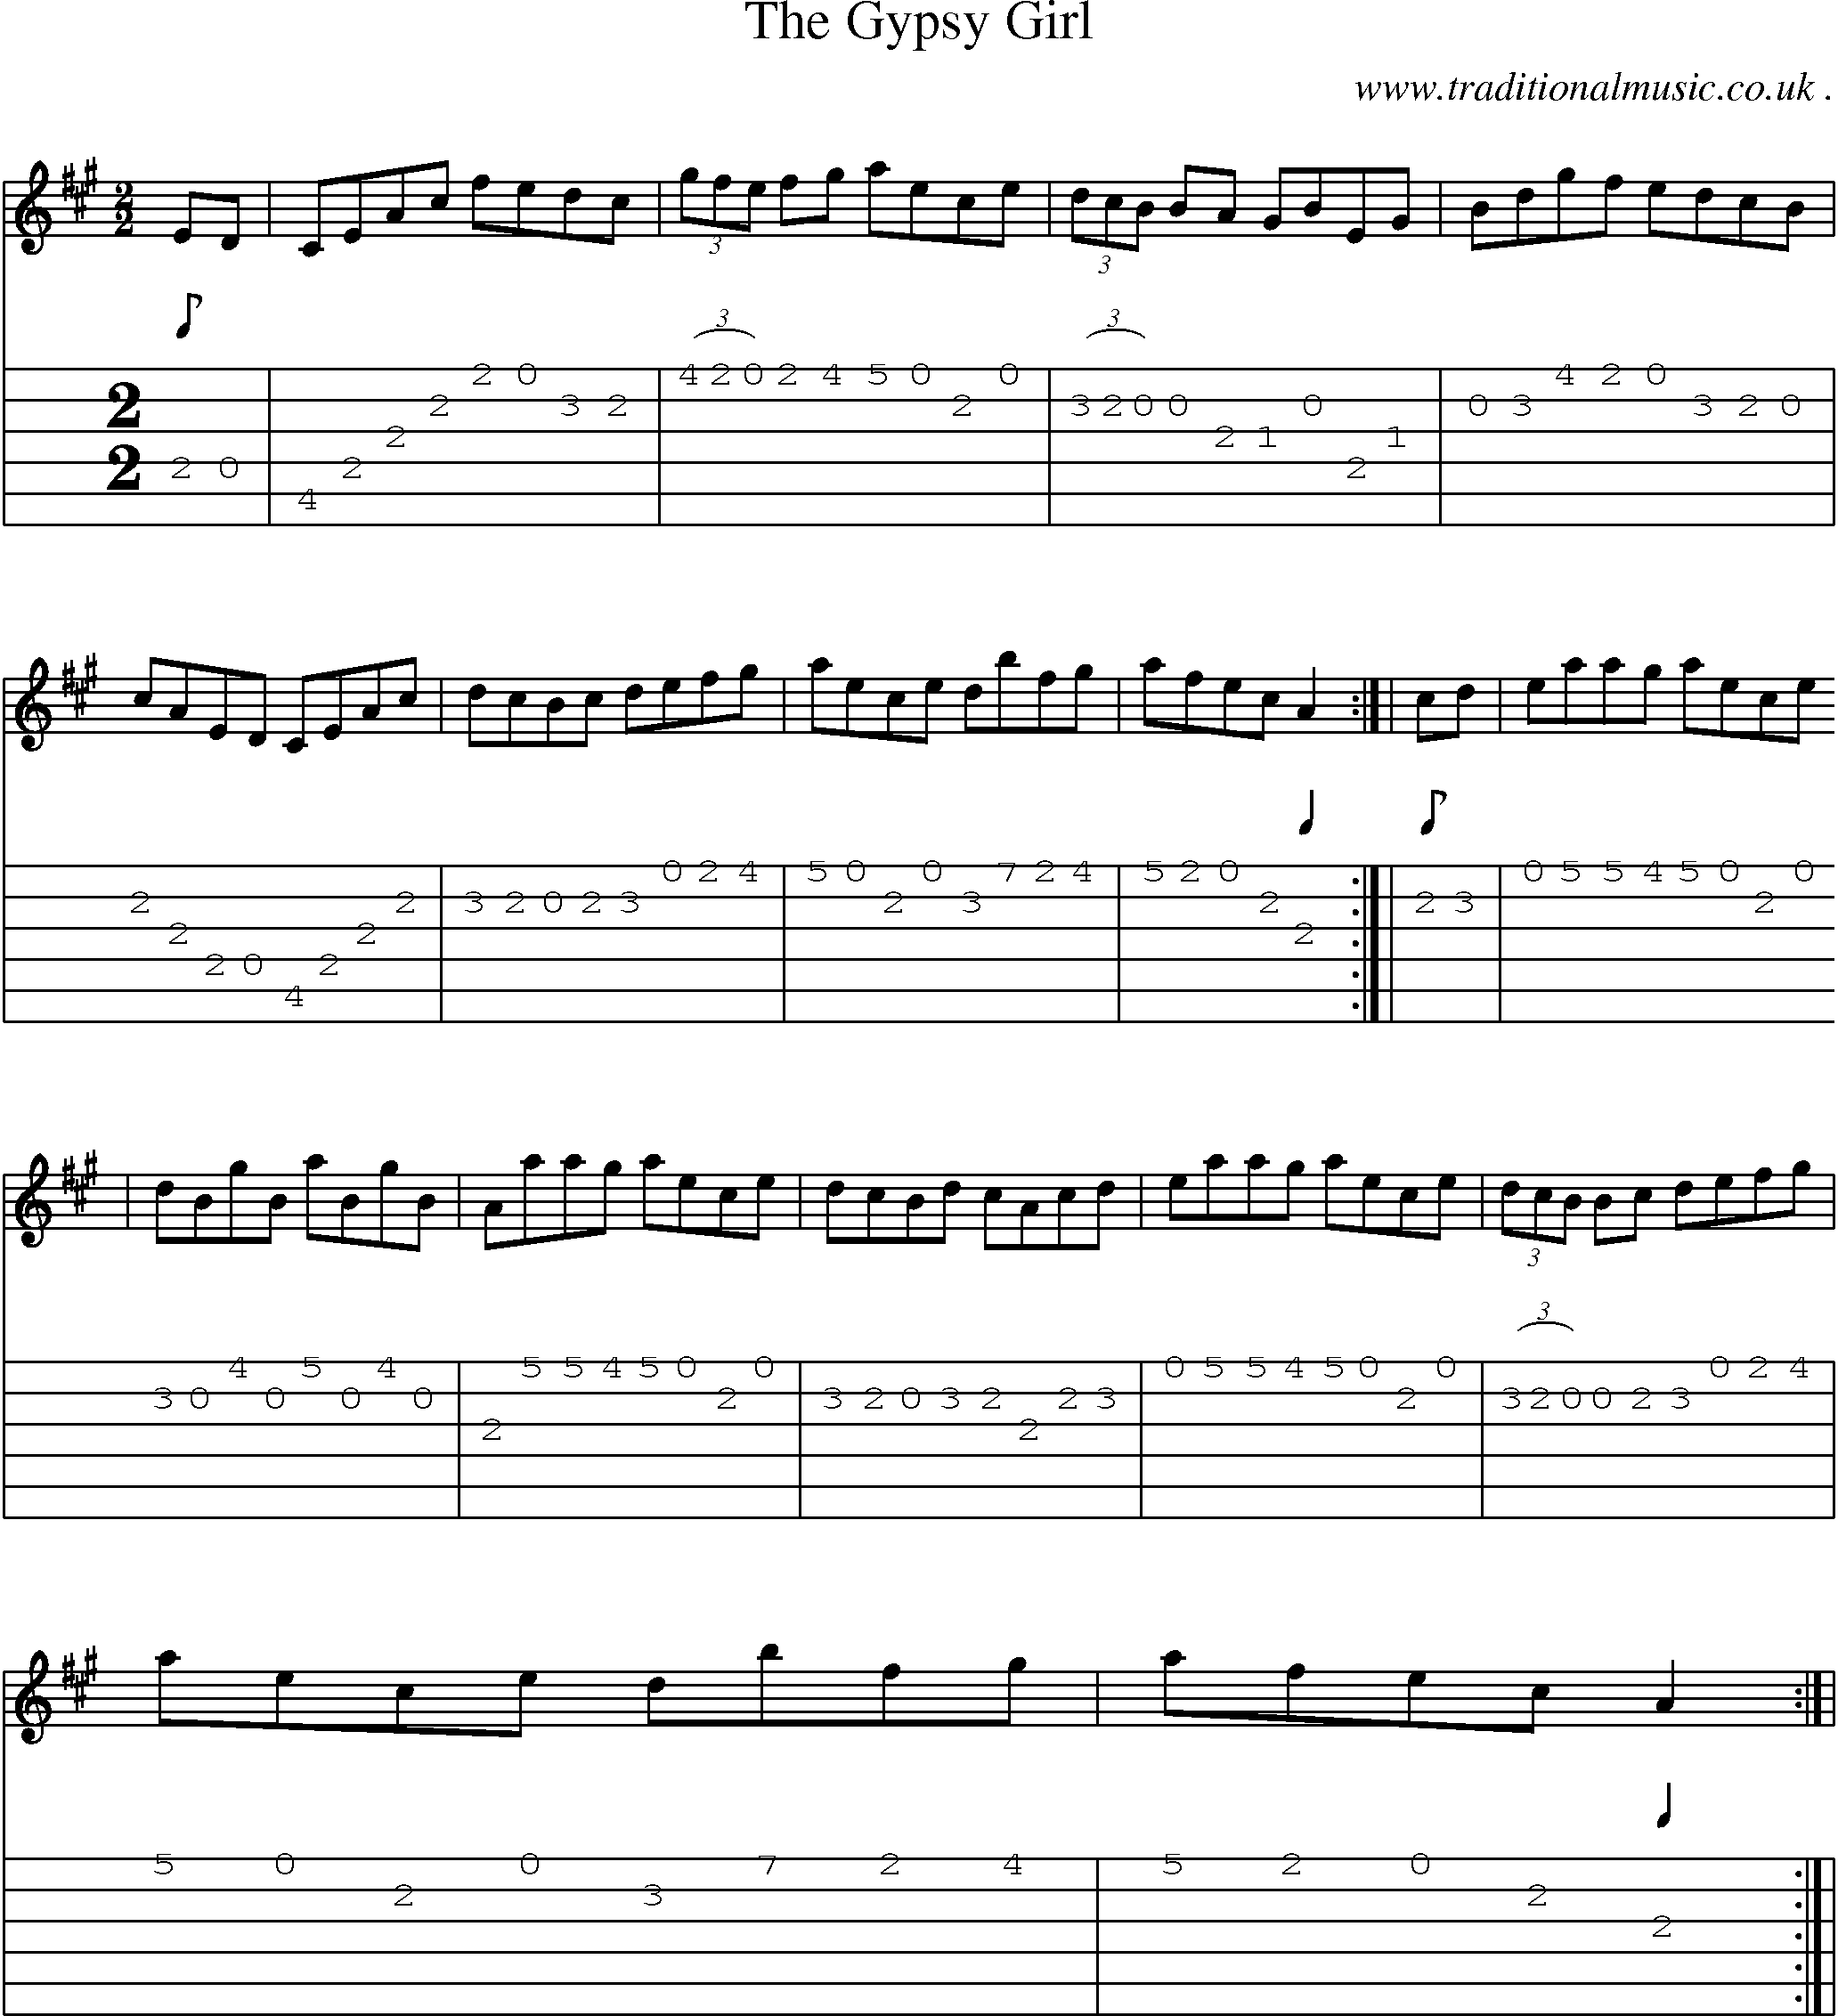 Sheet-Music and Guitar Tabs for The Gypsy Girl